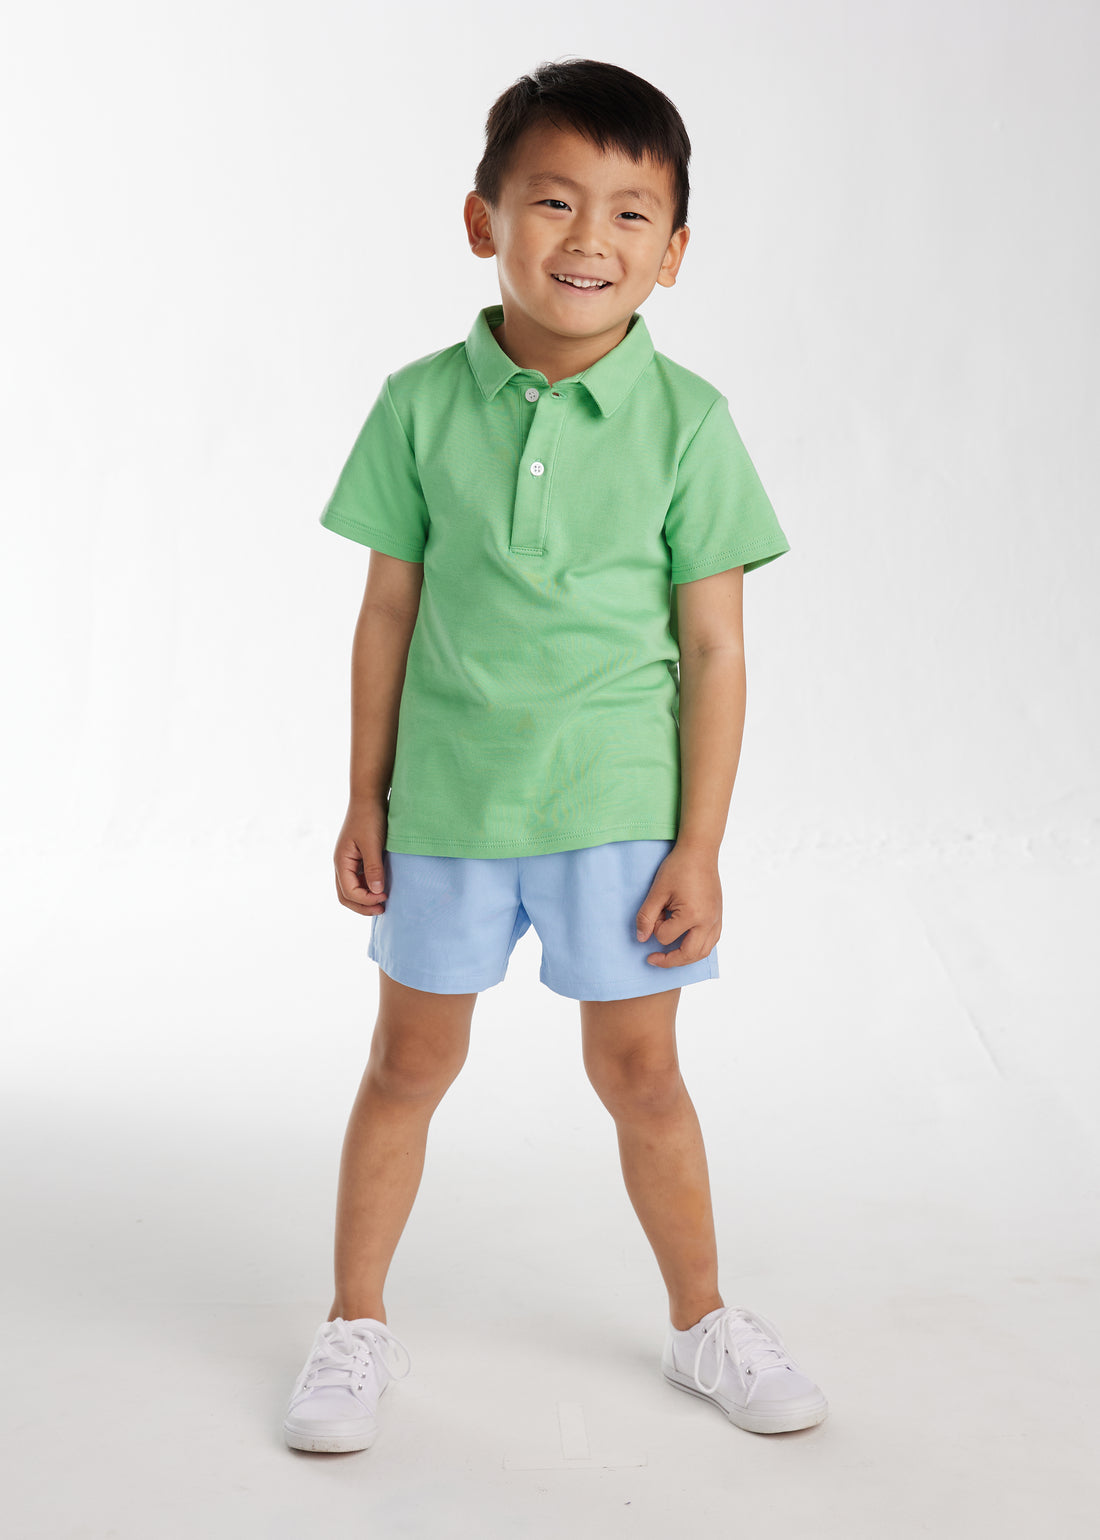 Little English classic clothing for kids, little boy&